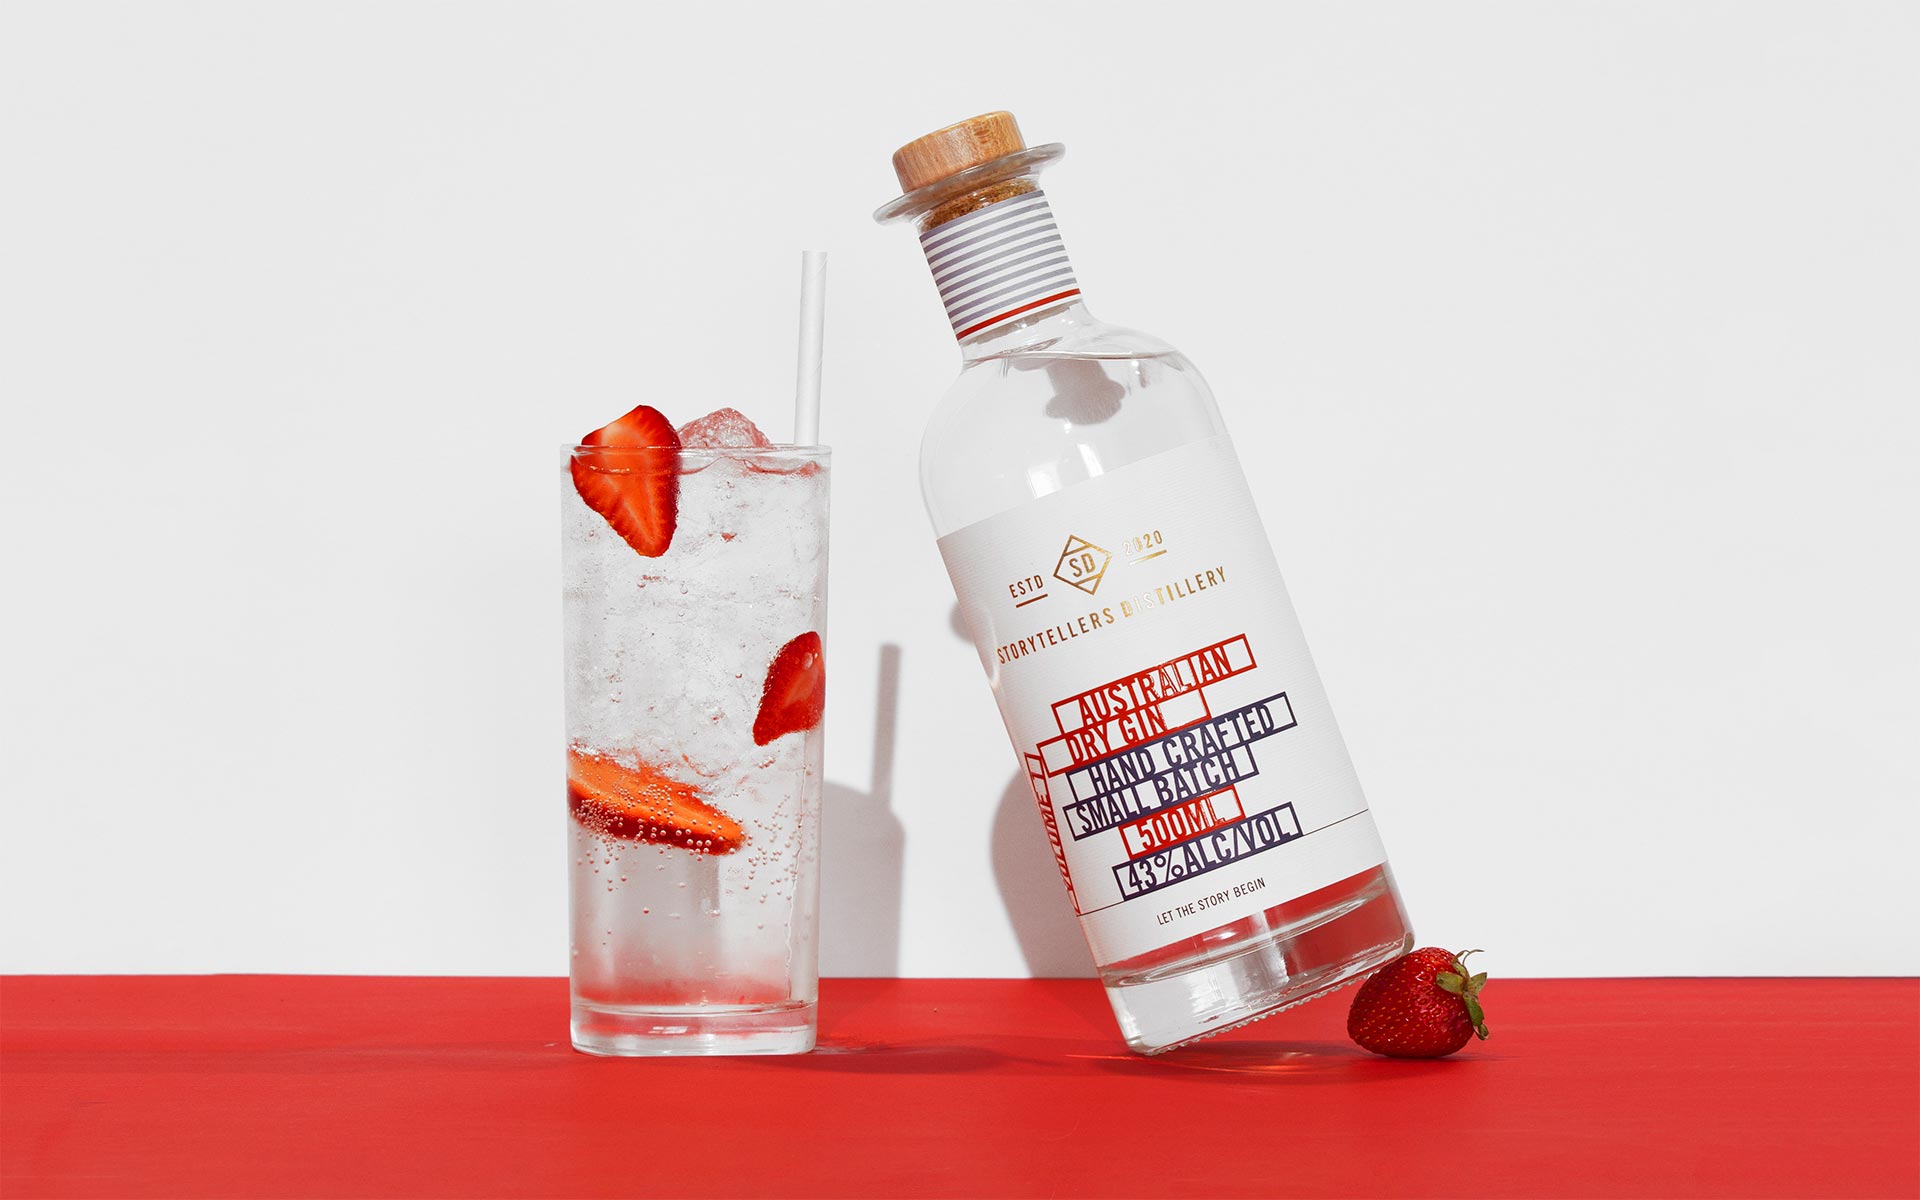 Storytellers Distillery volume 1 gin balancing on a strawberry along a gin and soda with freshly sliced strawberry